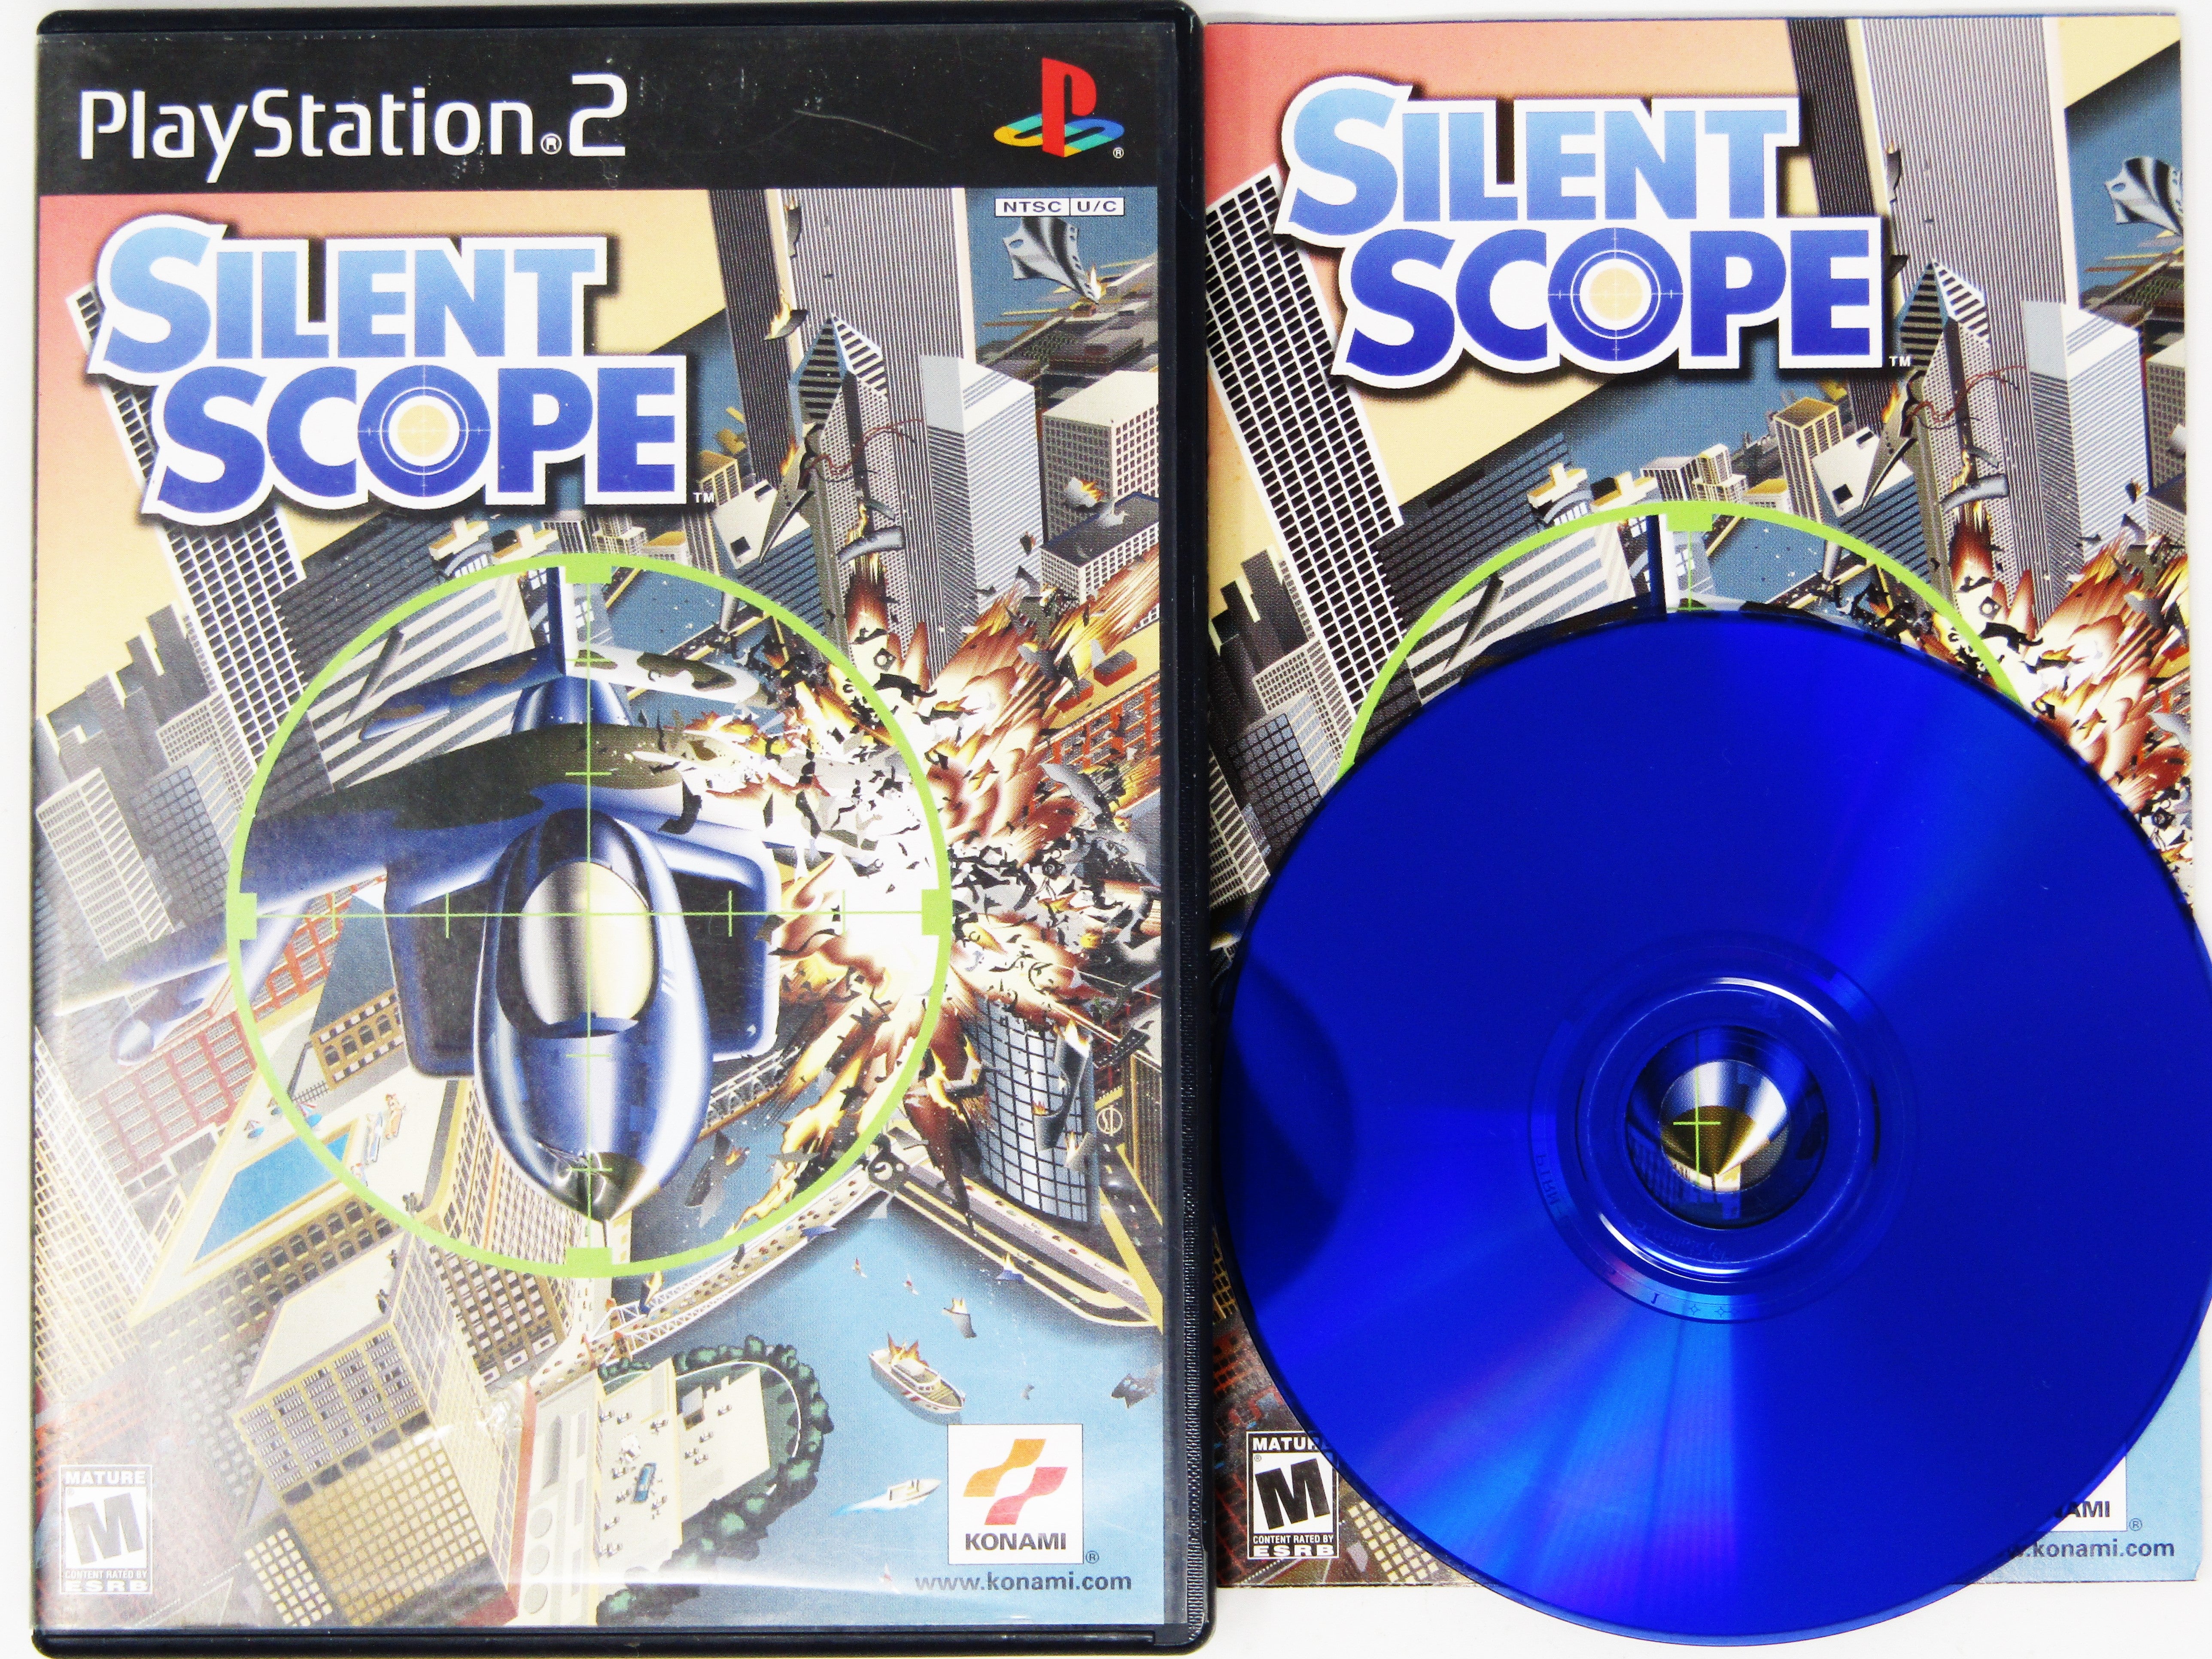 Silent Scope (Playstation 2 / PS2)